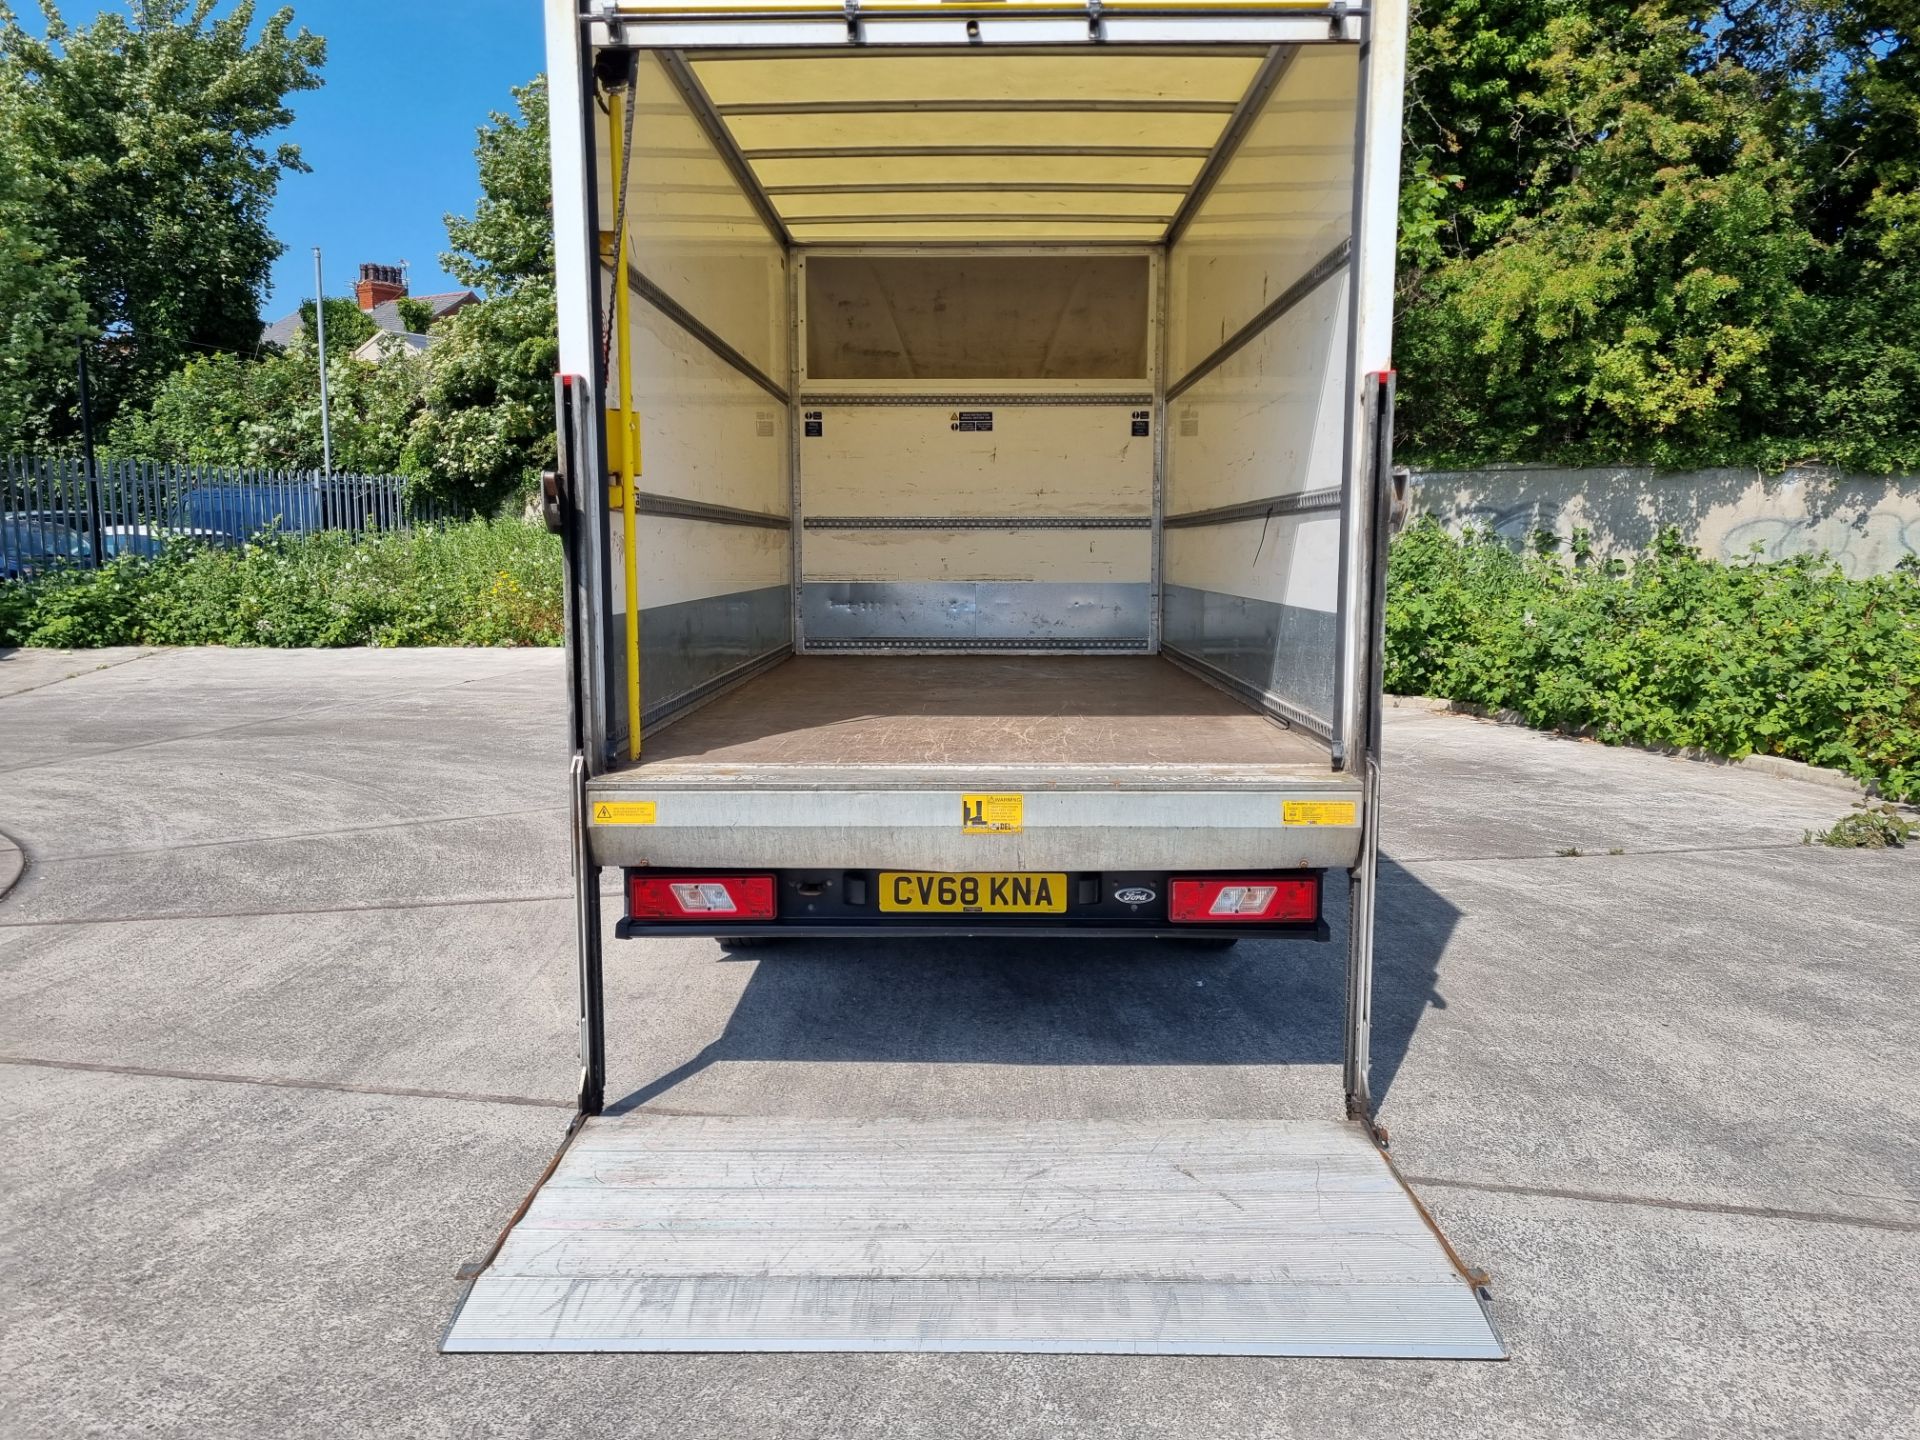 2018 Transit Luton with tail lift - Image 13 of 14